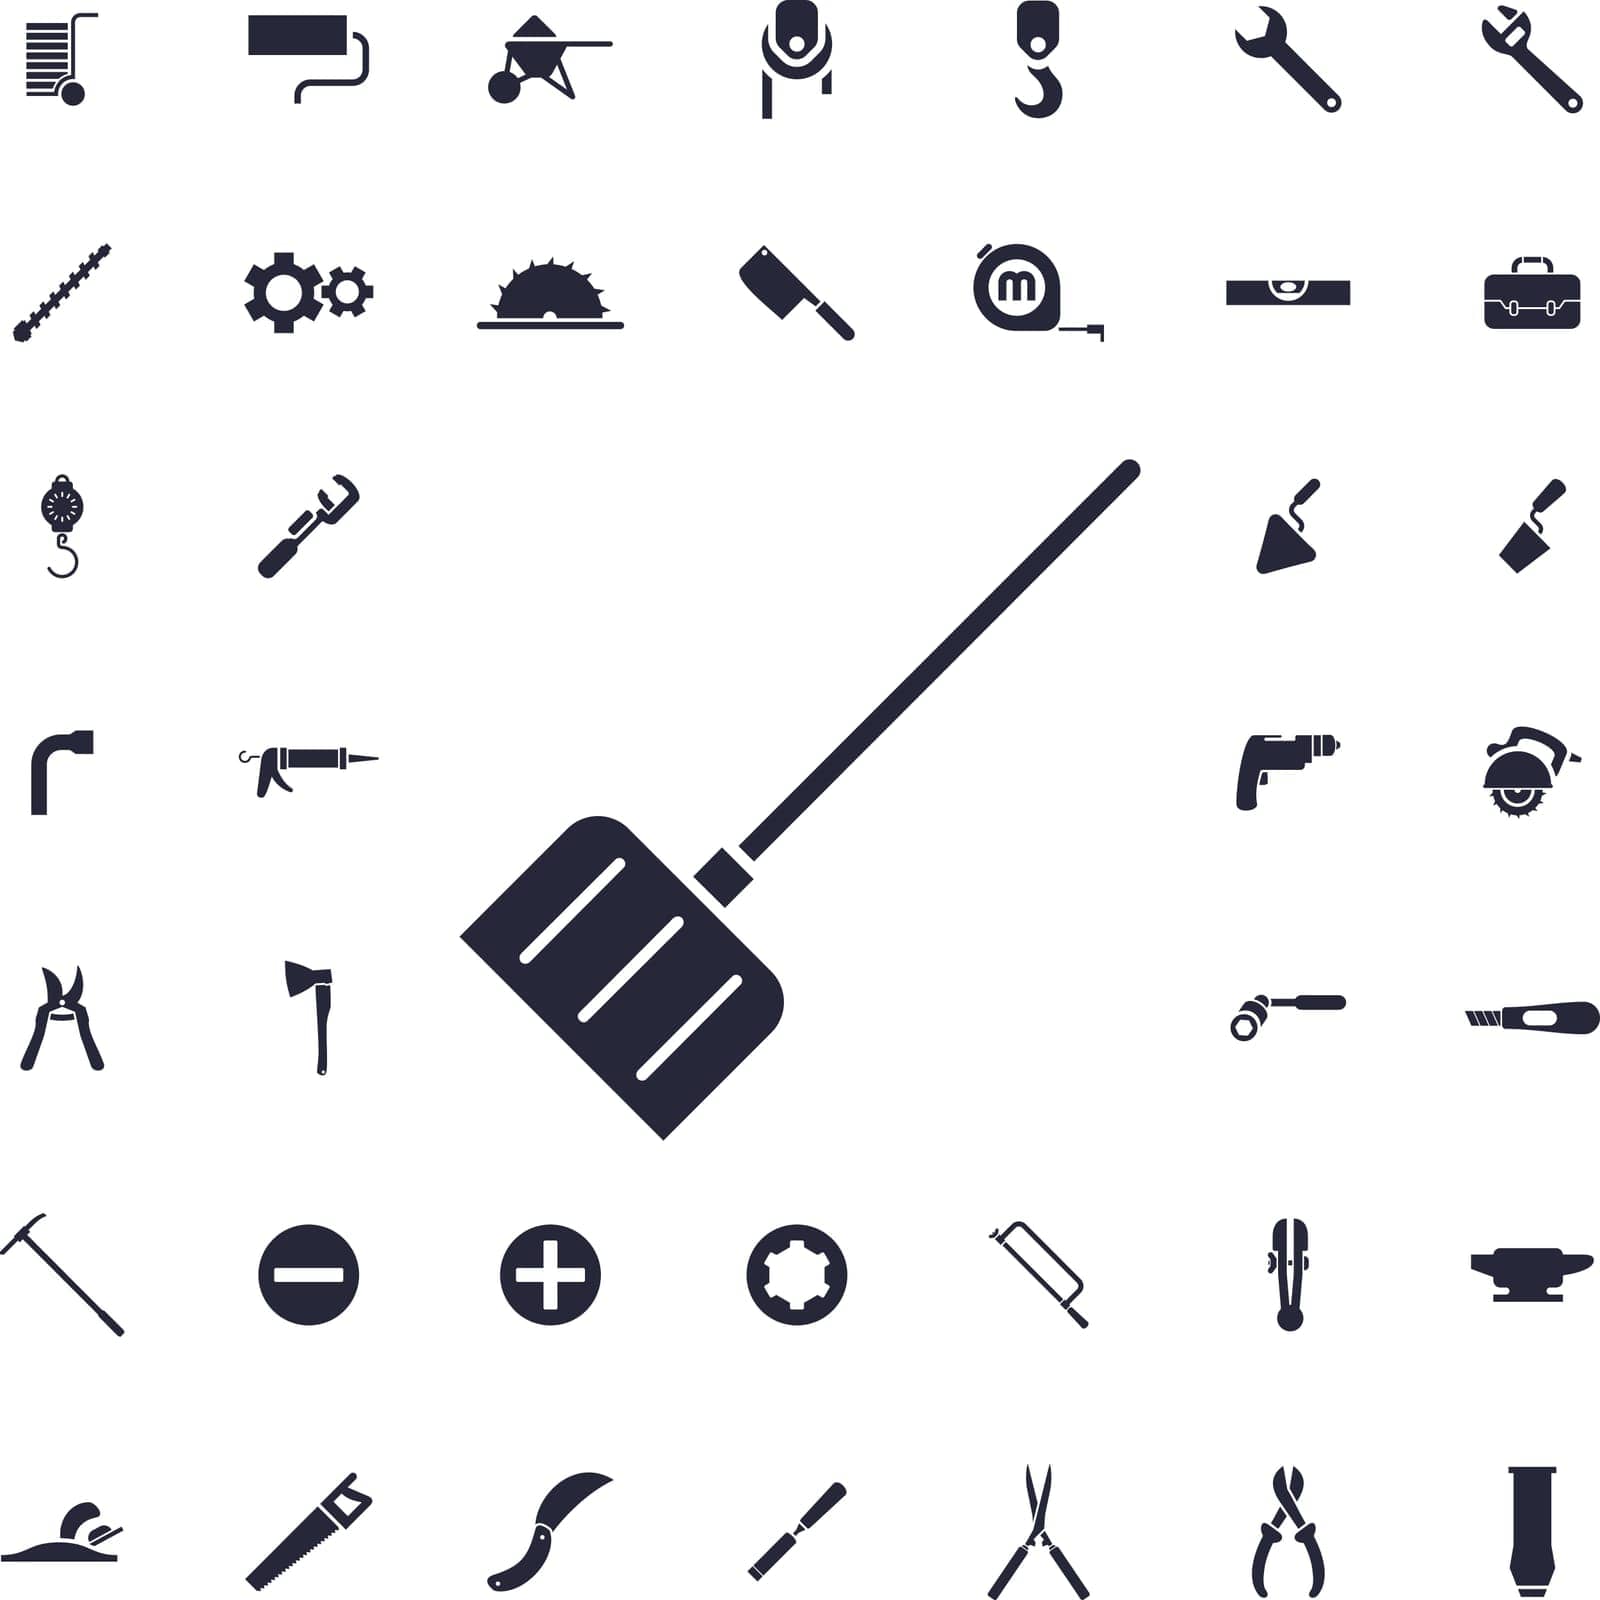 symbol,steel,dig,gardening,icon,sign,shovel,winter,ice,manual,digger,remove,blade,freeze,lifting,excavation,vector,hand,hardware,handtool,work,equipment,handle,spade,tool,hole,snow,shoveling,removal,ground,illustration,carry by ogqcorp